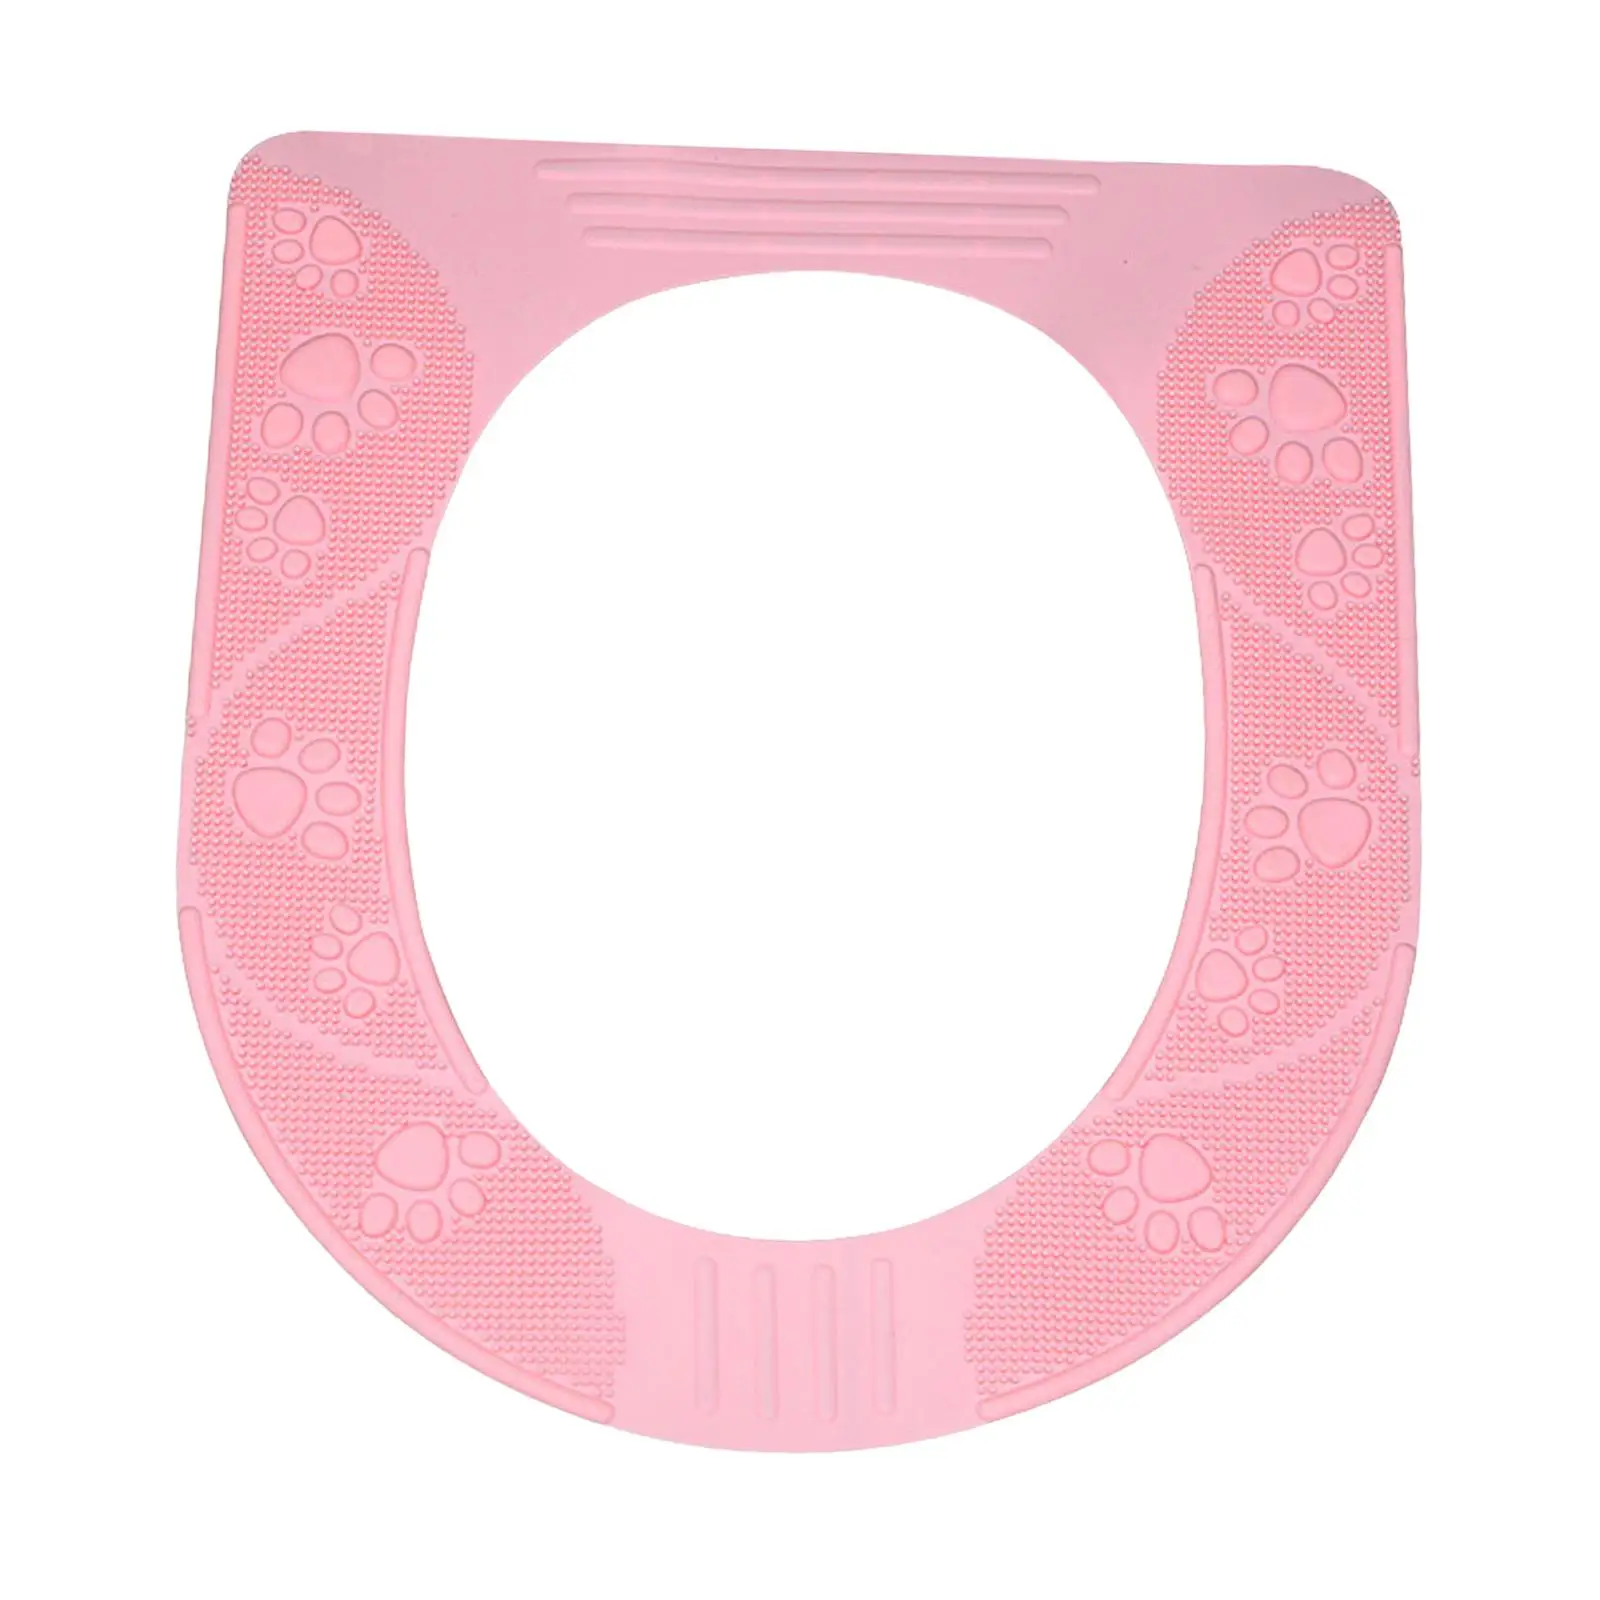 Portable Toilet Seat Cover Four Seasons Universal Bathroom Closestool Cover Toilet Seat Mat Toilet Seat Cushion for Home